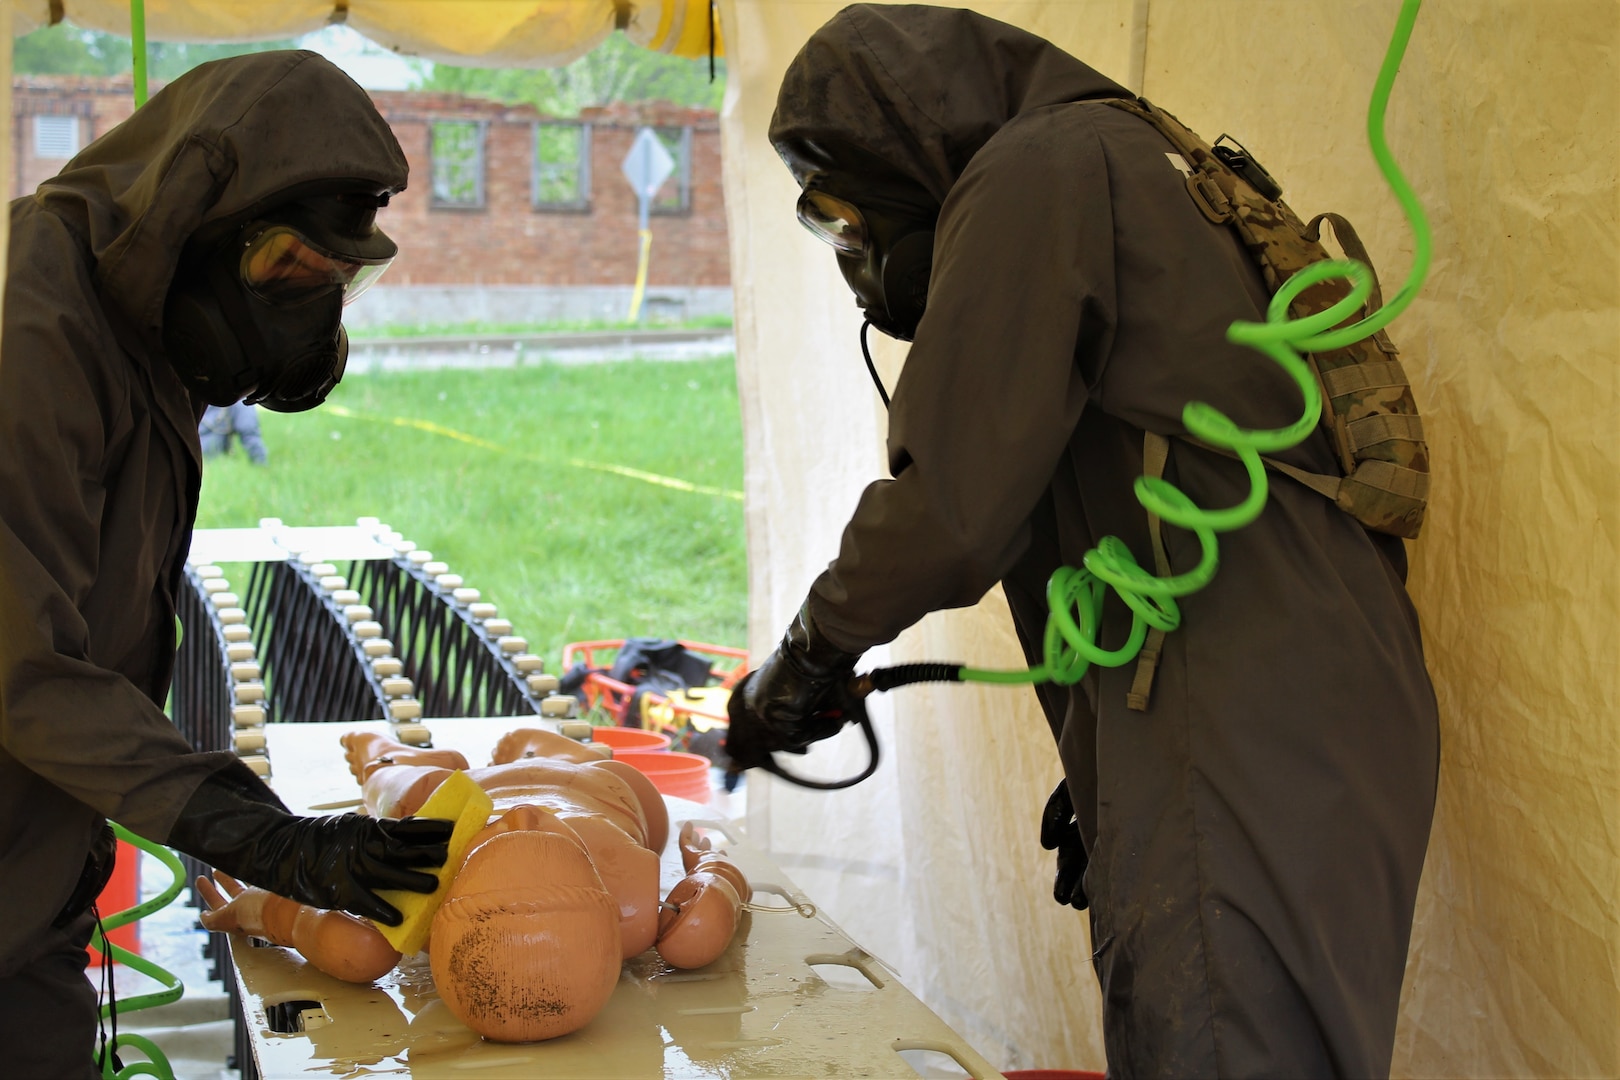 Soldiers from 68th Engineer Construction Company, Task Force Operations, Joint Task Force Civil Support (JTFCS), decontaminate a manikin after rescuing it from an irradiated rubble pile during Exercise Guardian Response at Muscatatuck Urban Training Center, May 4, 2019. When directed, JTFCS provides command and control of the 5,200-person Defense Chemical Biological Radiological Nuclear (CBRN) Response Force (DCRF) during a catastrophic crisis in support of civil authorities and the lead federal agency. Vibrant Response/Guardian Response is an annual, combined Command Post Exercise and Field Training Exercise which validates the ability of the DCRF forces to conduct the CBRN Response mission. (U.S. Army photo by 2nd Lt. Corey Maisch/released)